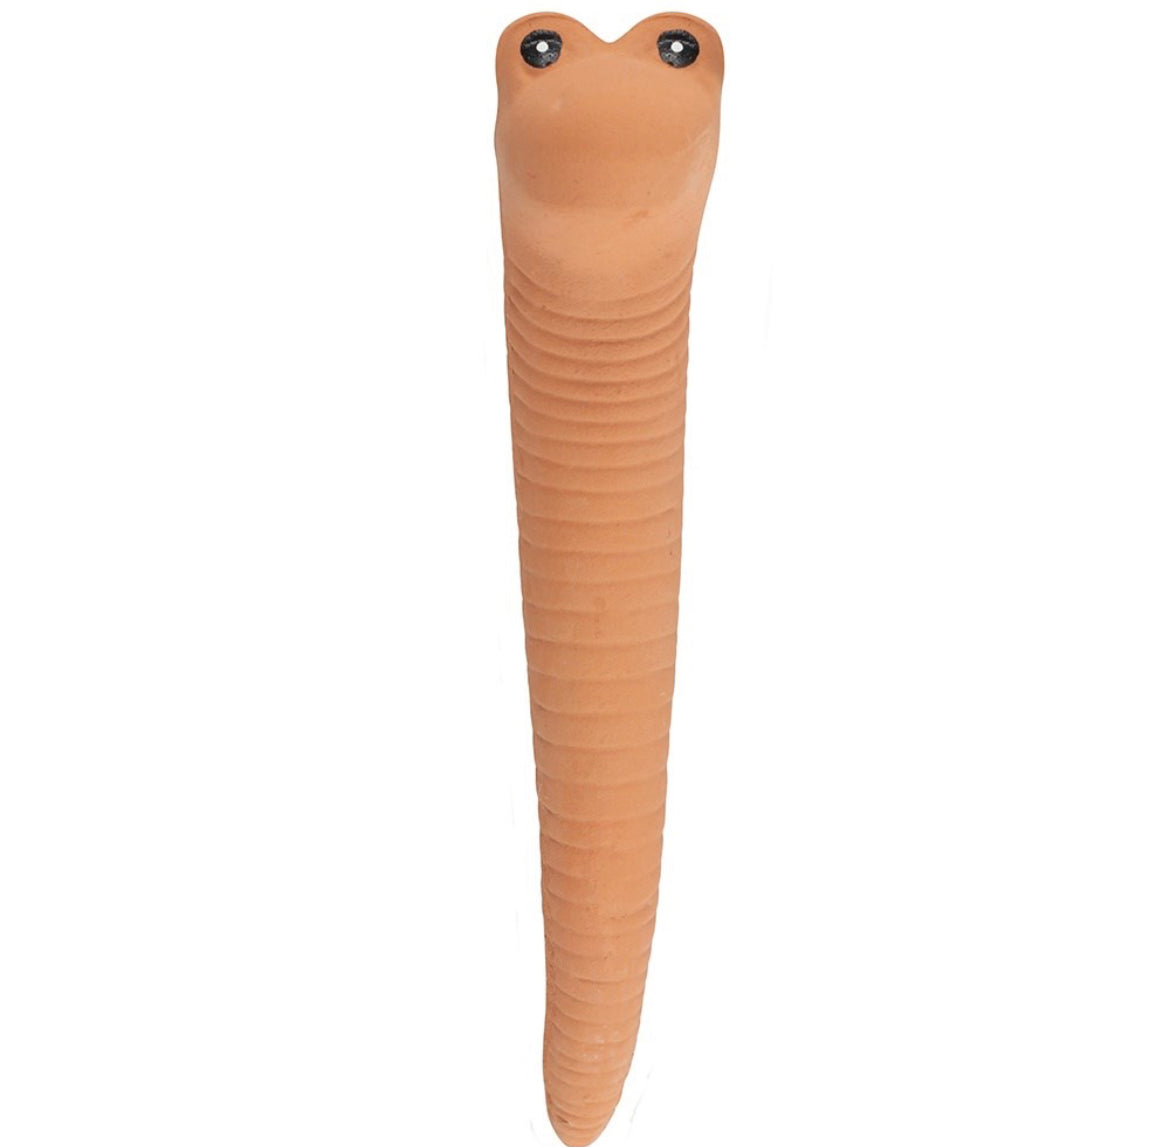 Large Willy The Terracotta Worm